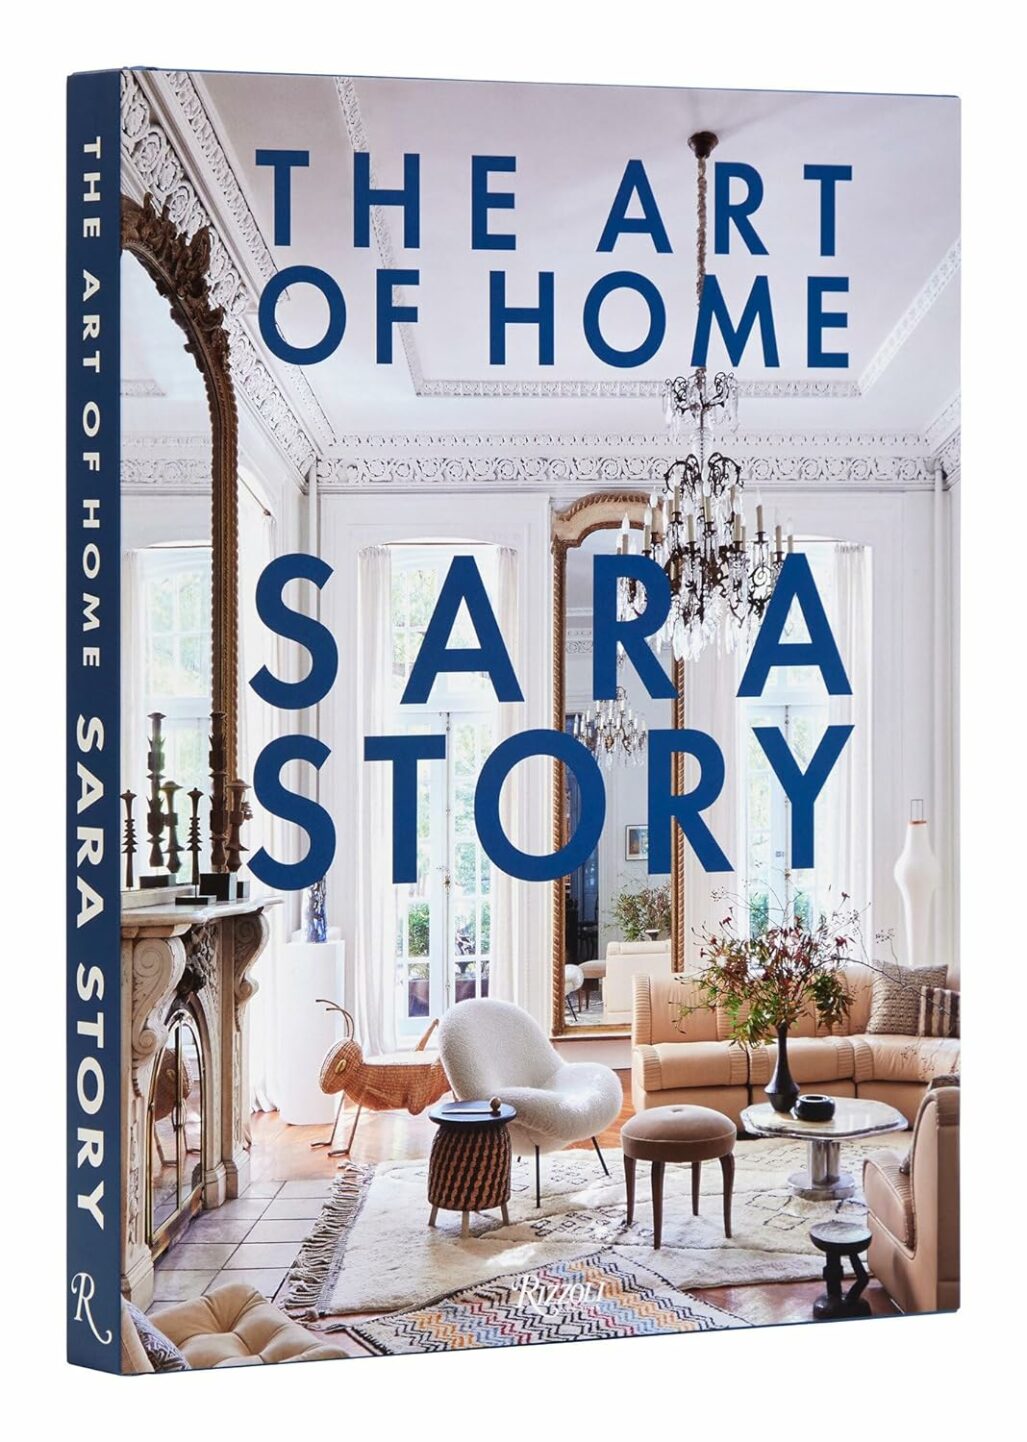 The Art of Home by Sara Story